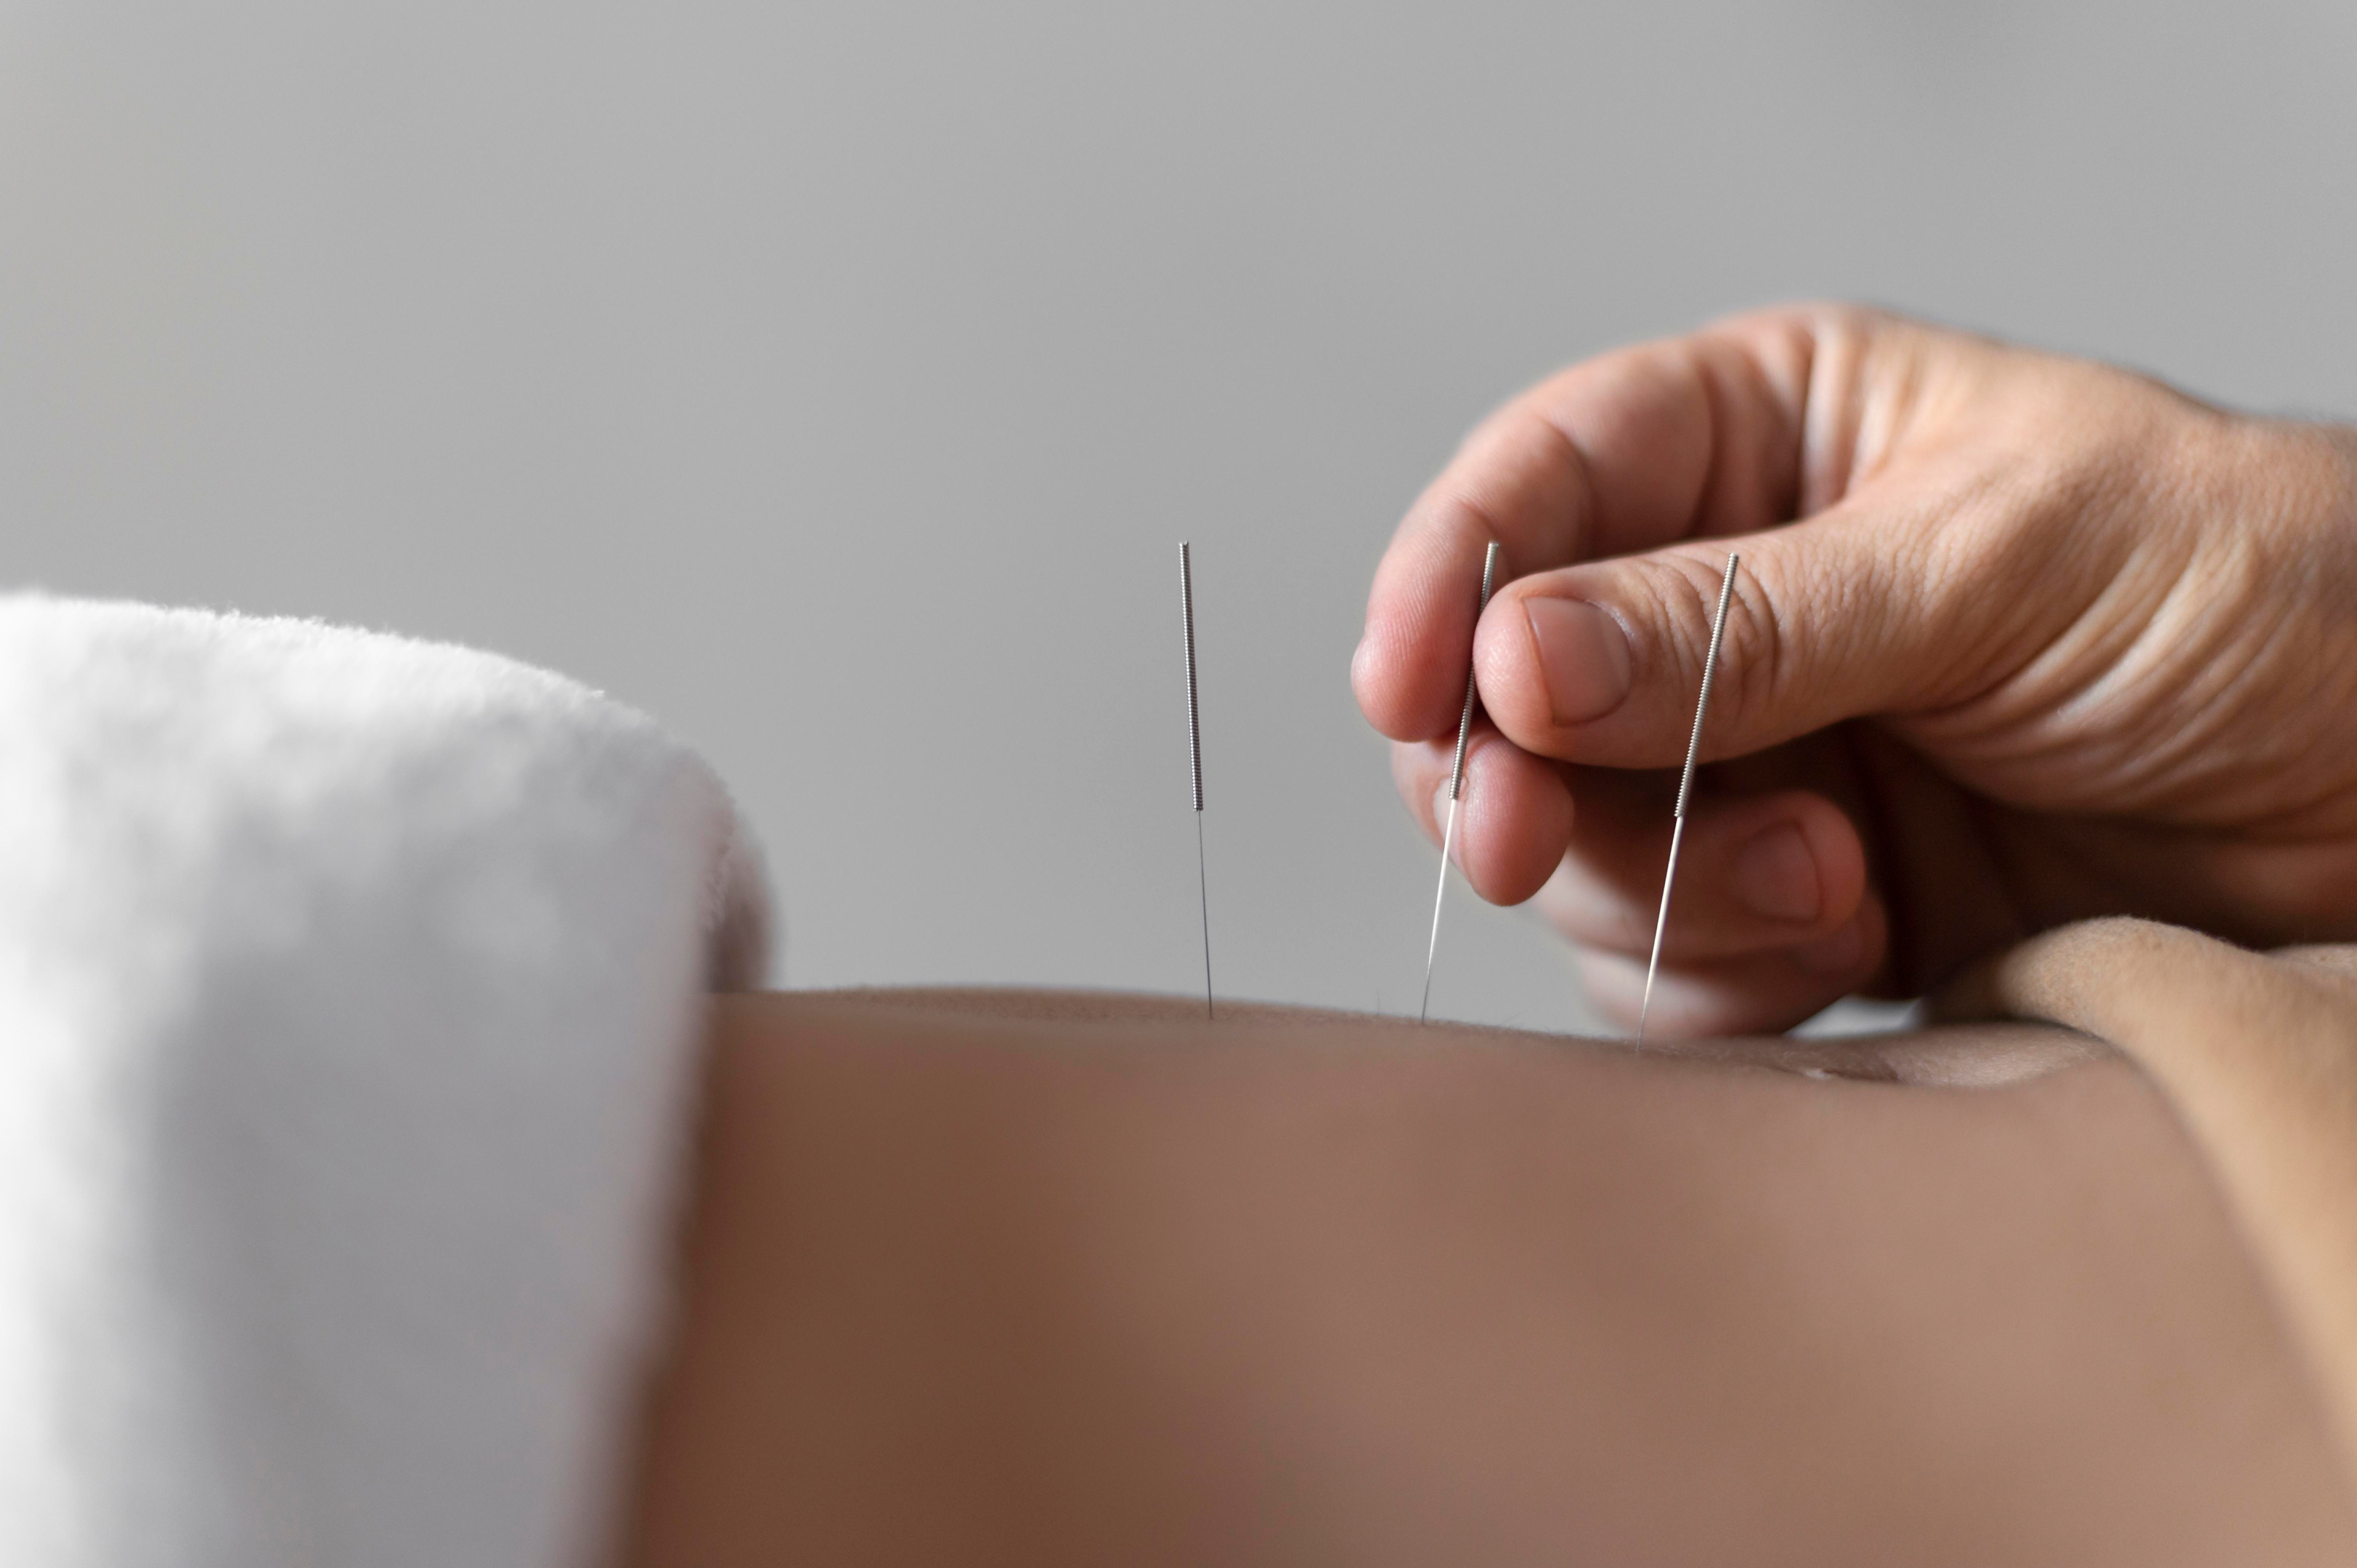 Acupuncture involves pricking fine needles at a specific point on the body.